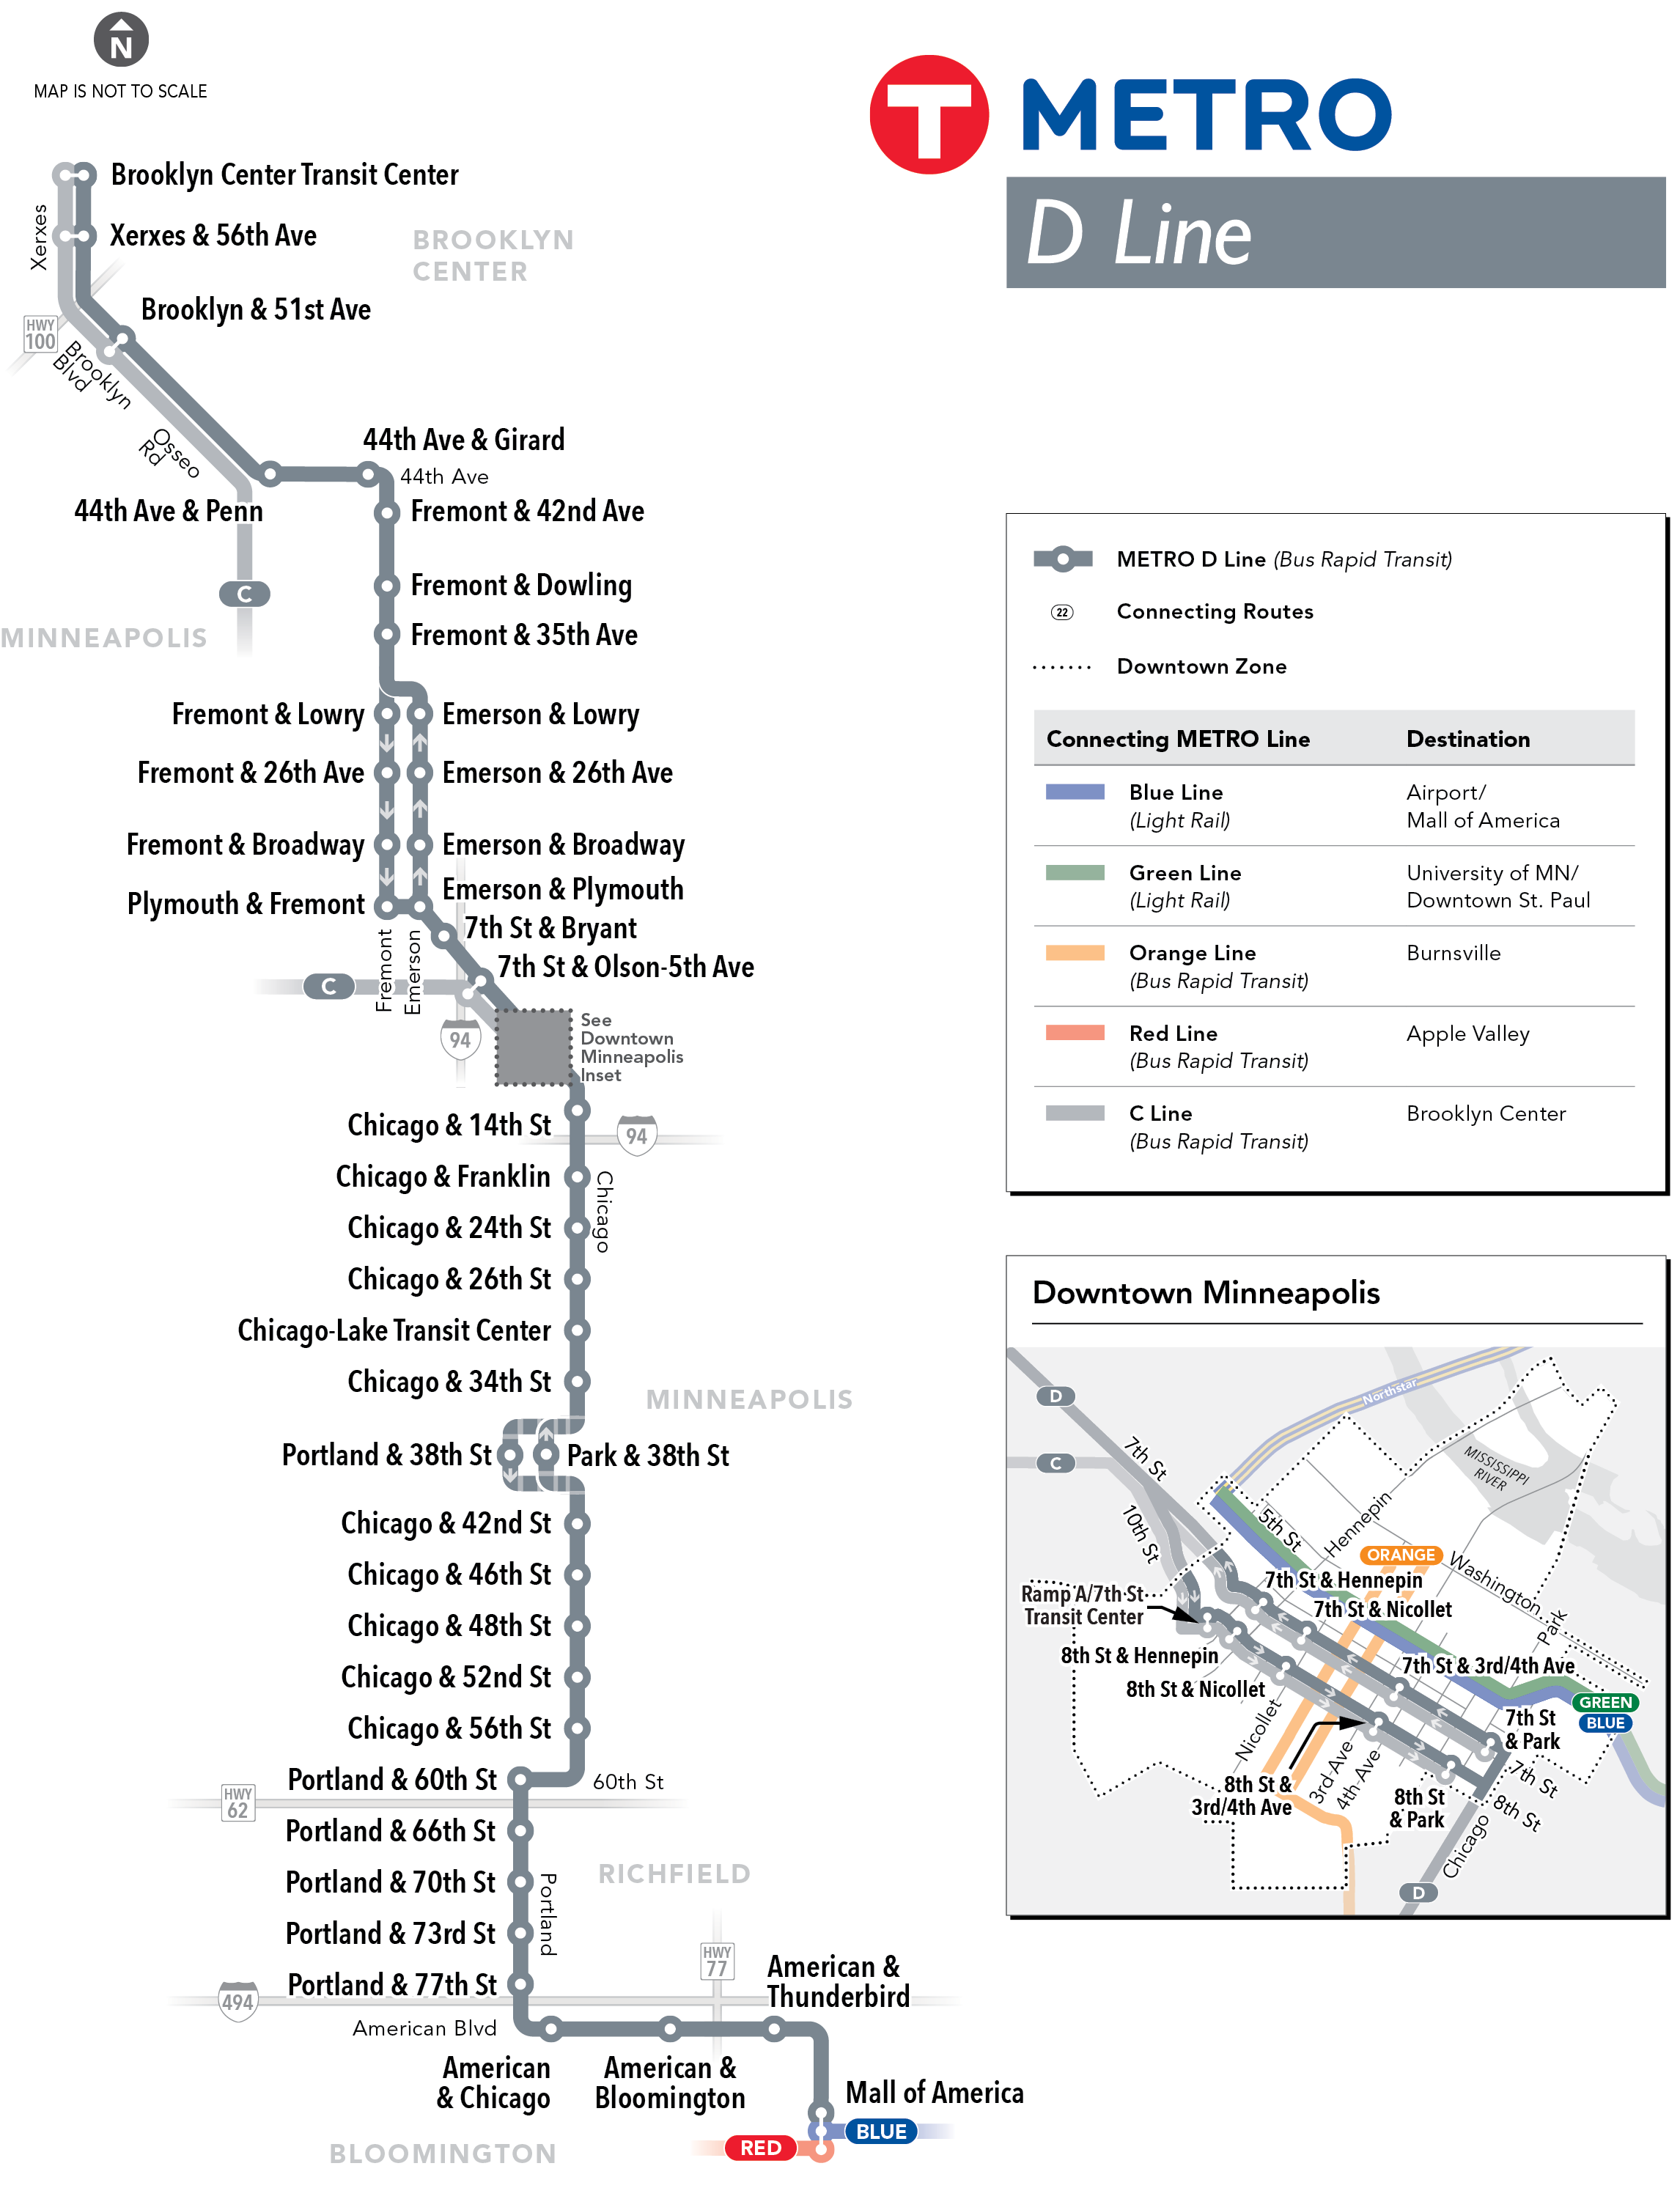 Map of the D Line route